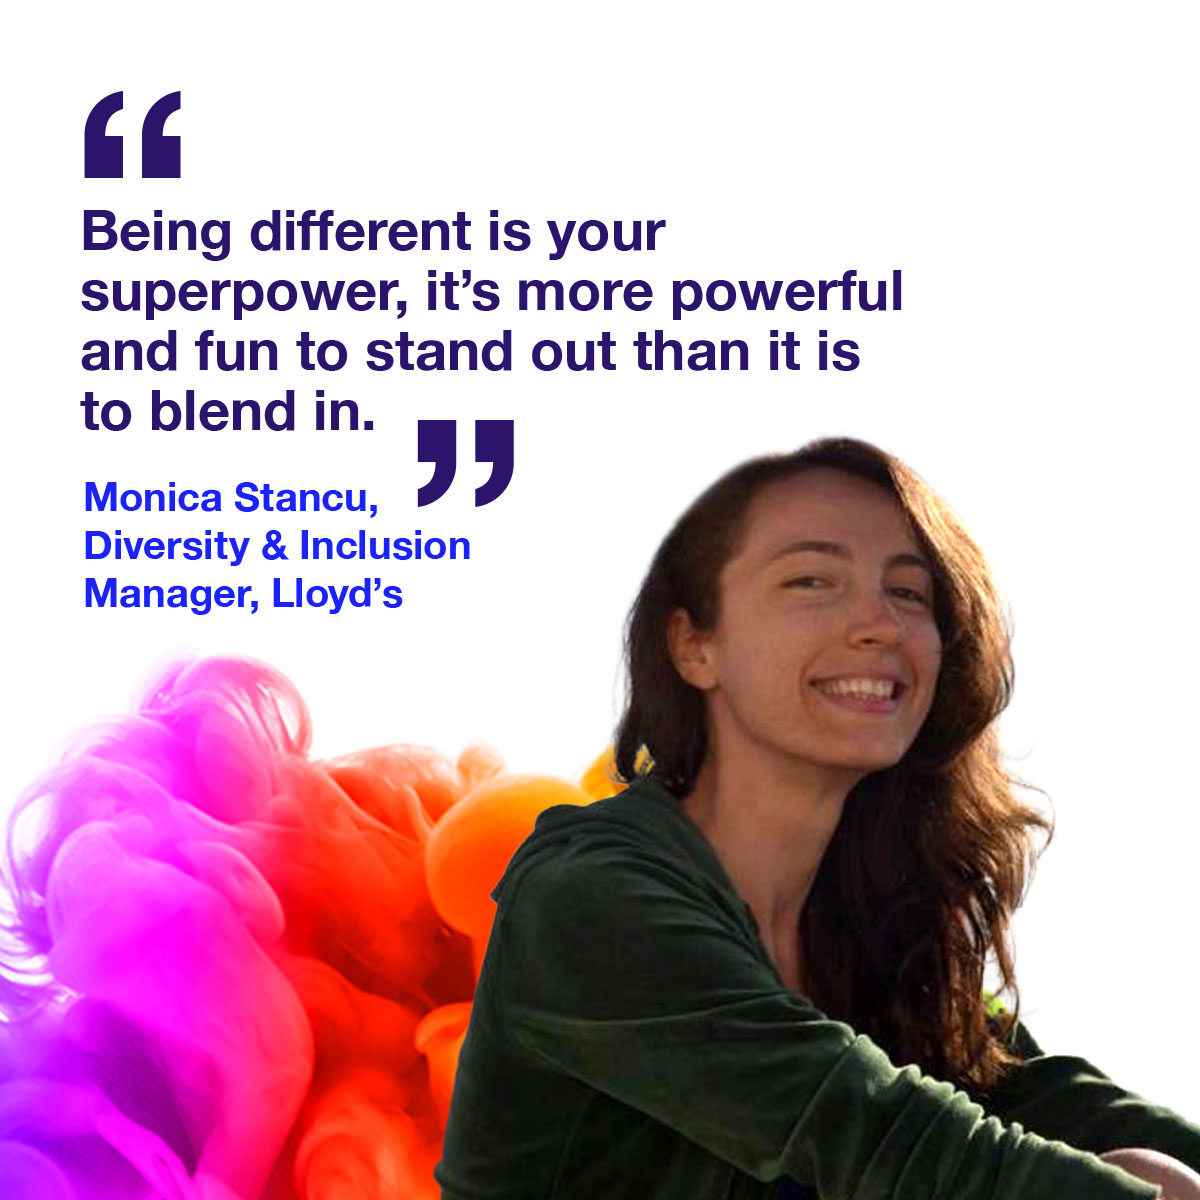 Monica Stancu says being different is your superpower, it's more powerful and fun to stand out than it is to blend in.